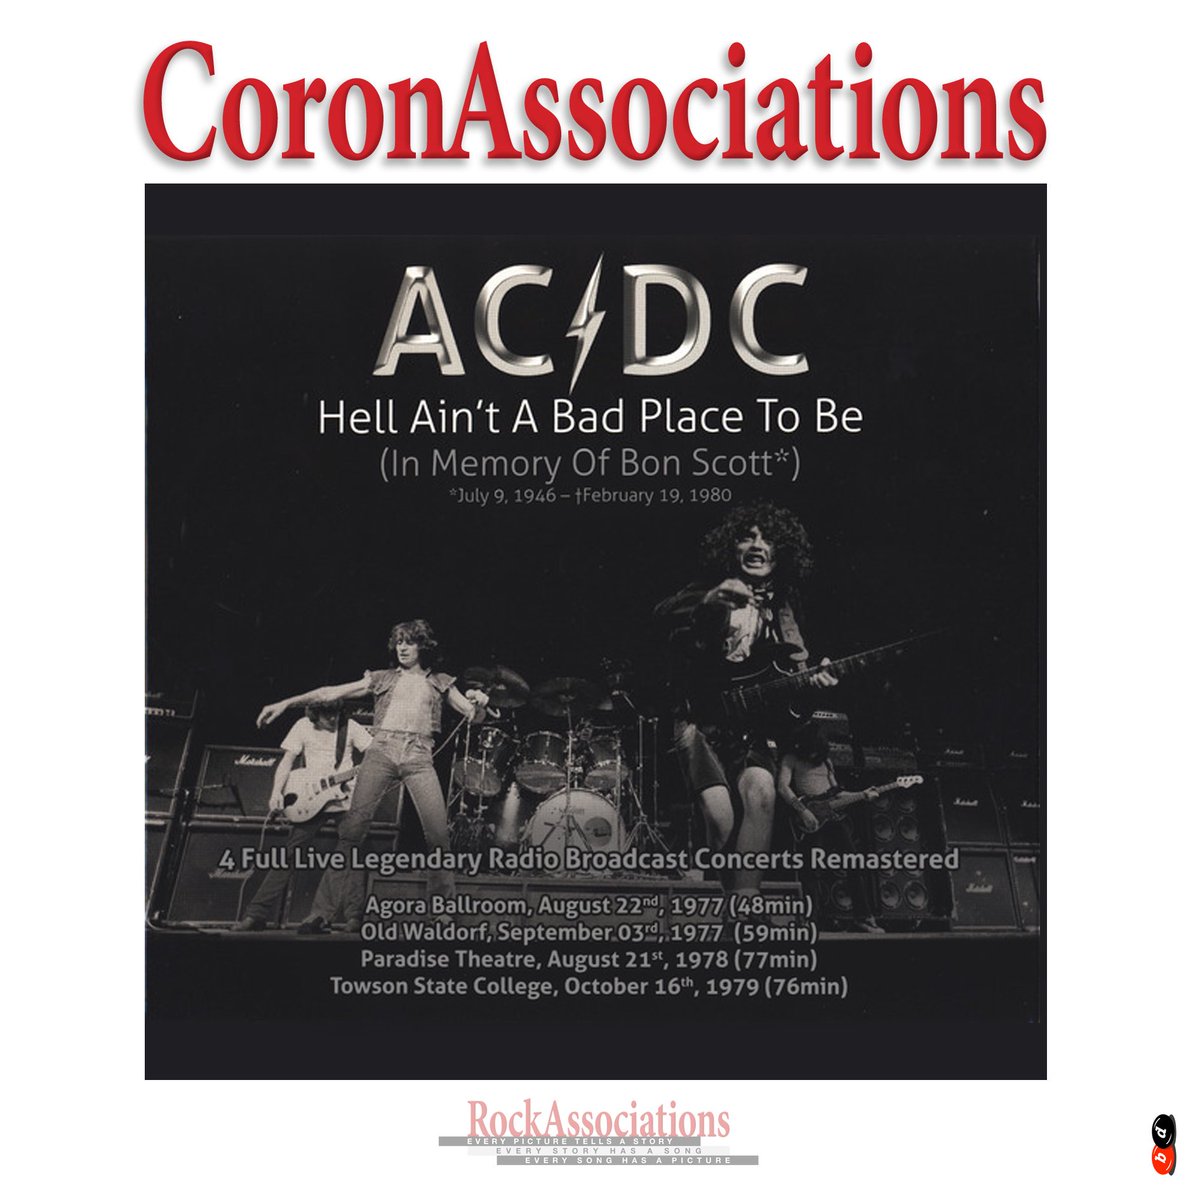 Day 53 (3 days left)
”Hell Ain't a Bad Place to Be”
AC/DC
#corona #coronavirus #covid19 #wayoflife #confinementfrance #rockassociations #feelings #stayingalive #survive #TheShowMustGoOn #hardtimes #rockandroll #ACDC #BonScott not to be seen before long >
youtube.com/watch?v=ZuureX…